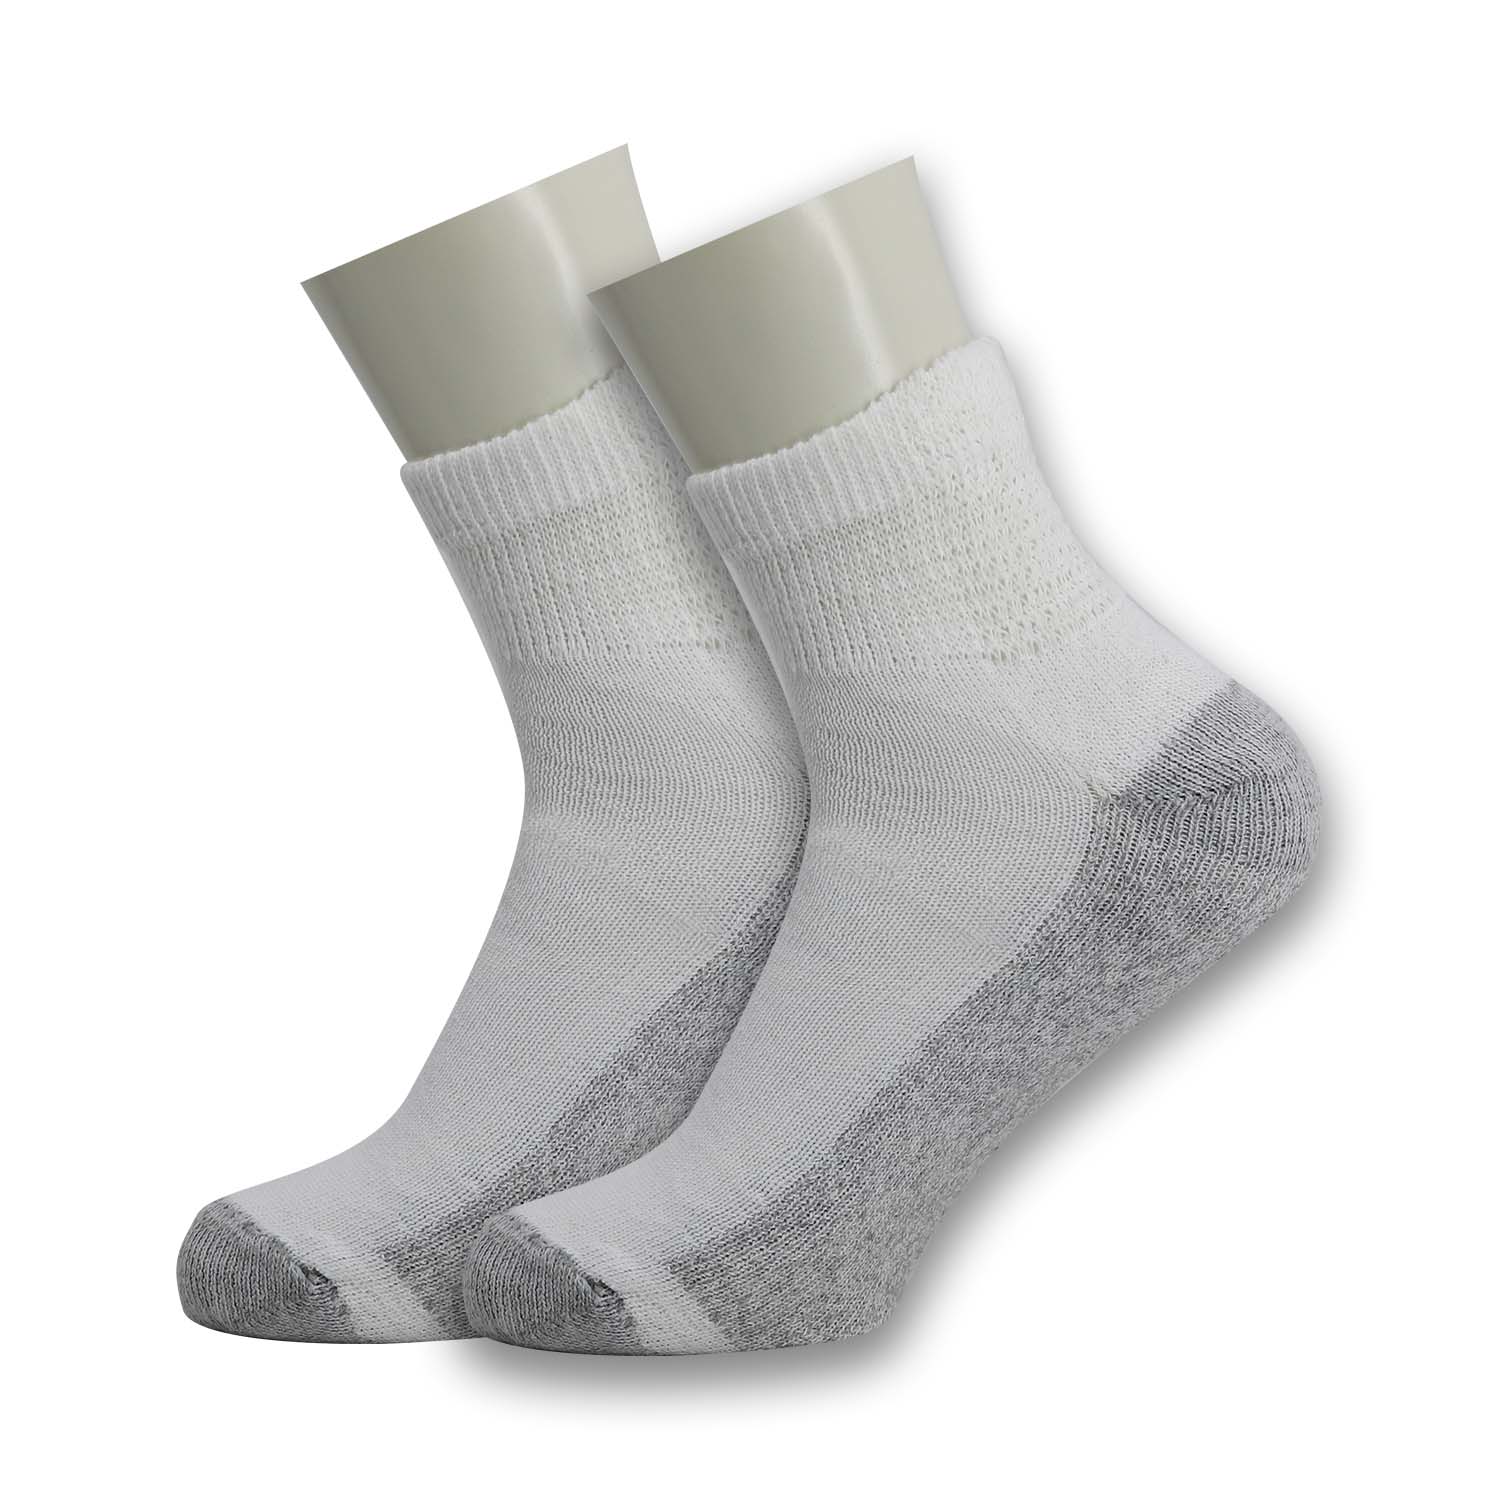 Men's Ankle Wholesale Socks, Size 10-13 In White With Grey - Bulk Case Of 120 Pairs